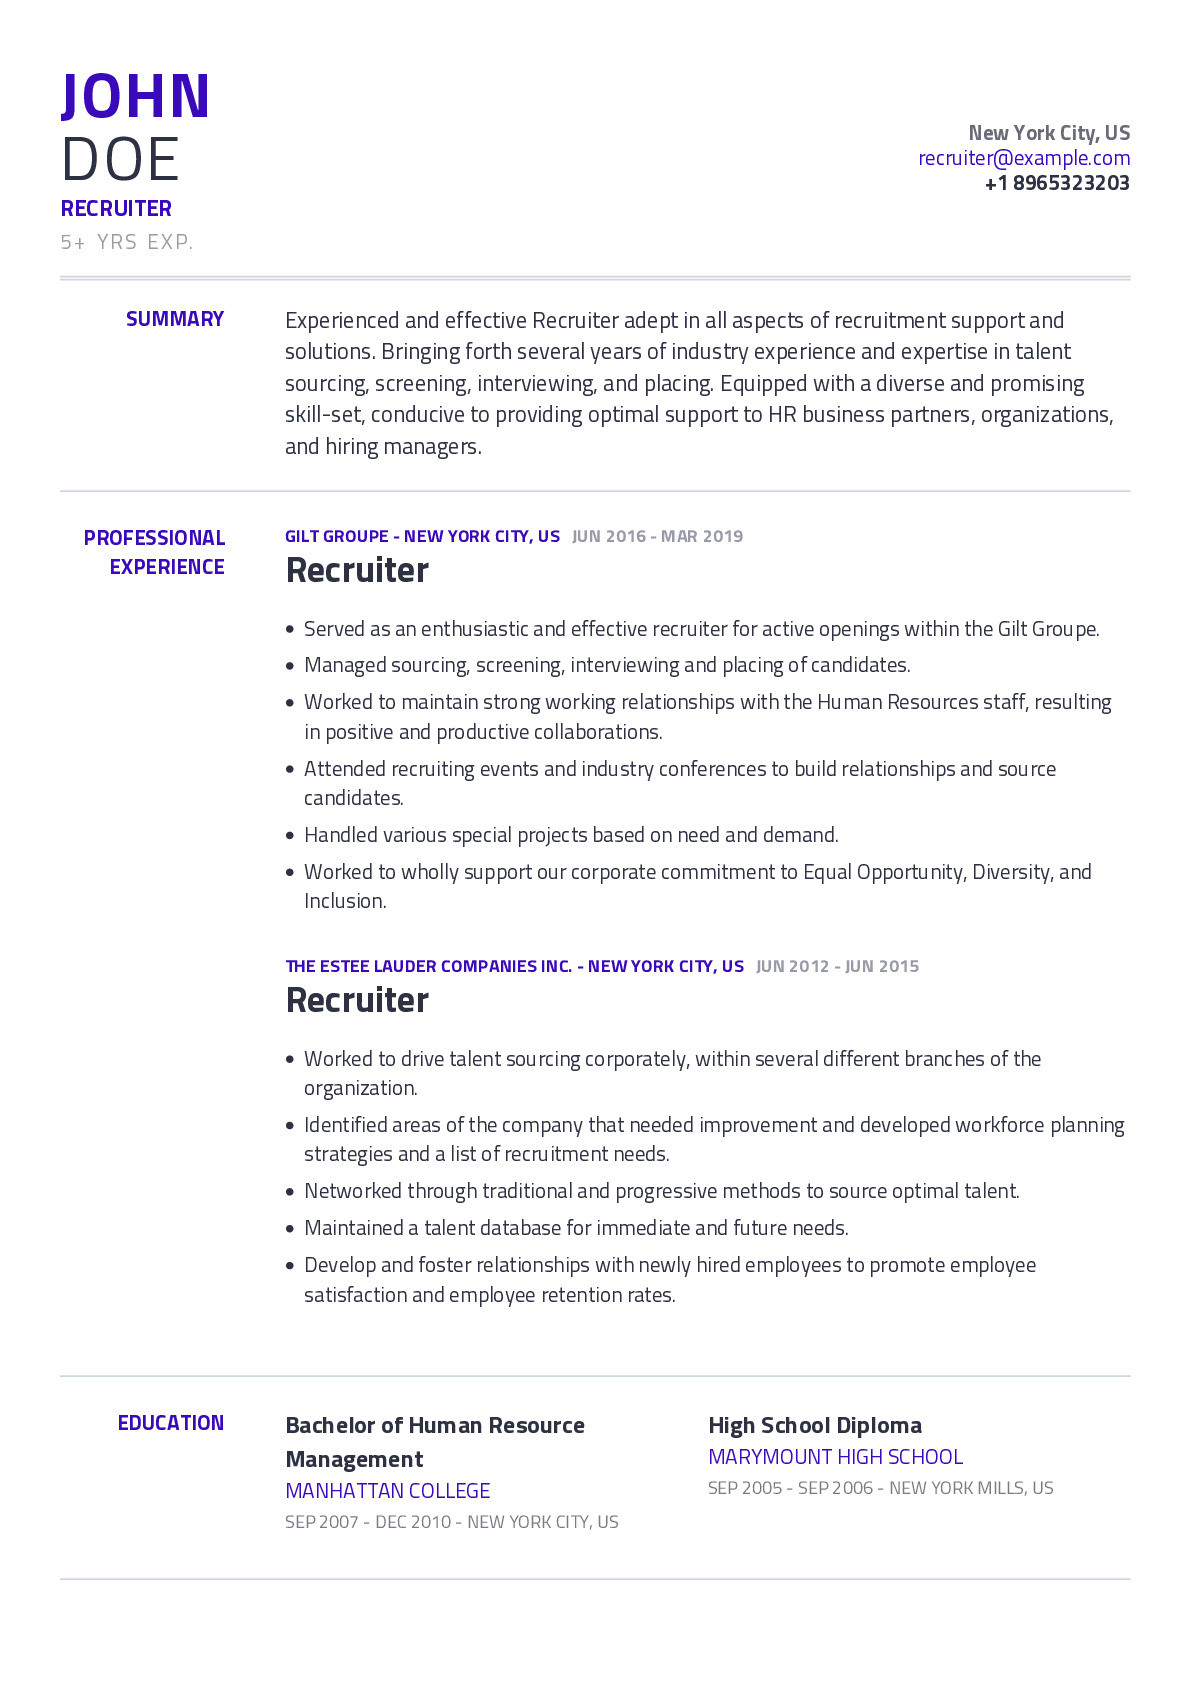 Sample Of A Good Recruiters Resume Recruiter Resume Example with Content Sample Craftmycv